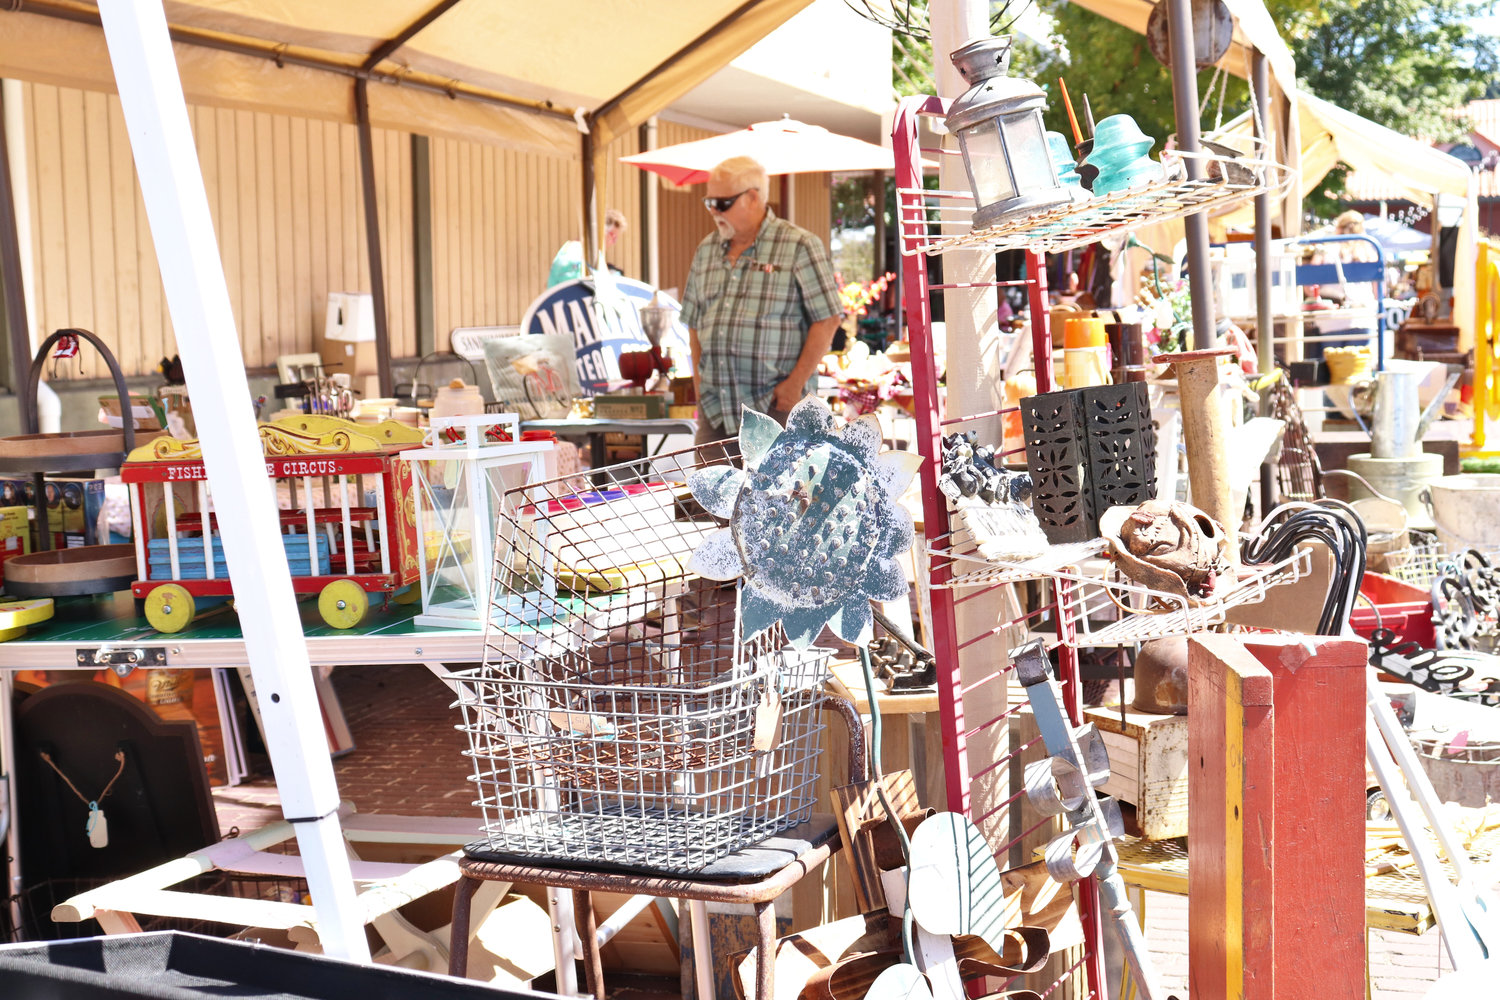 Customers browse a variety of antique, vintage and recycled goods at Antique Fest in downtown Centralia on Sunday.